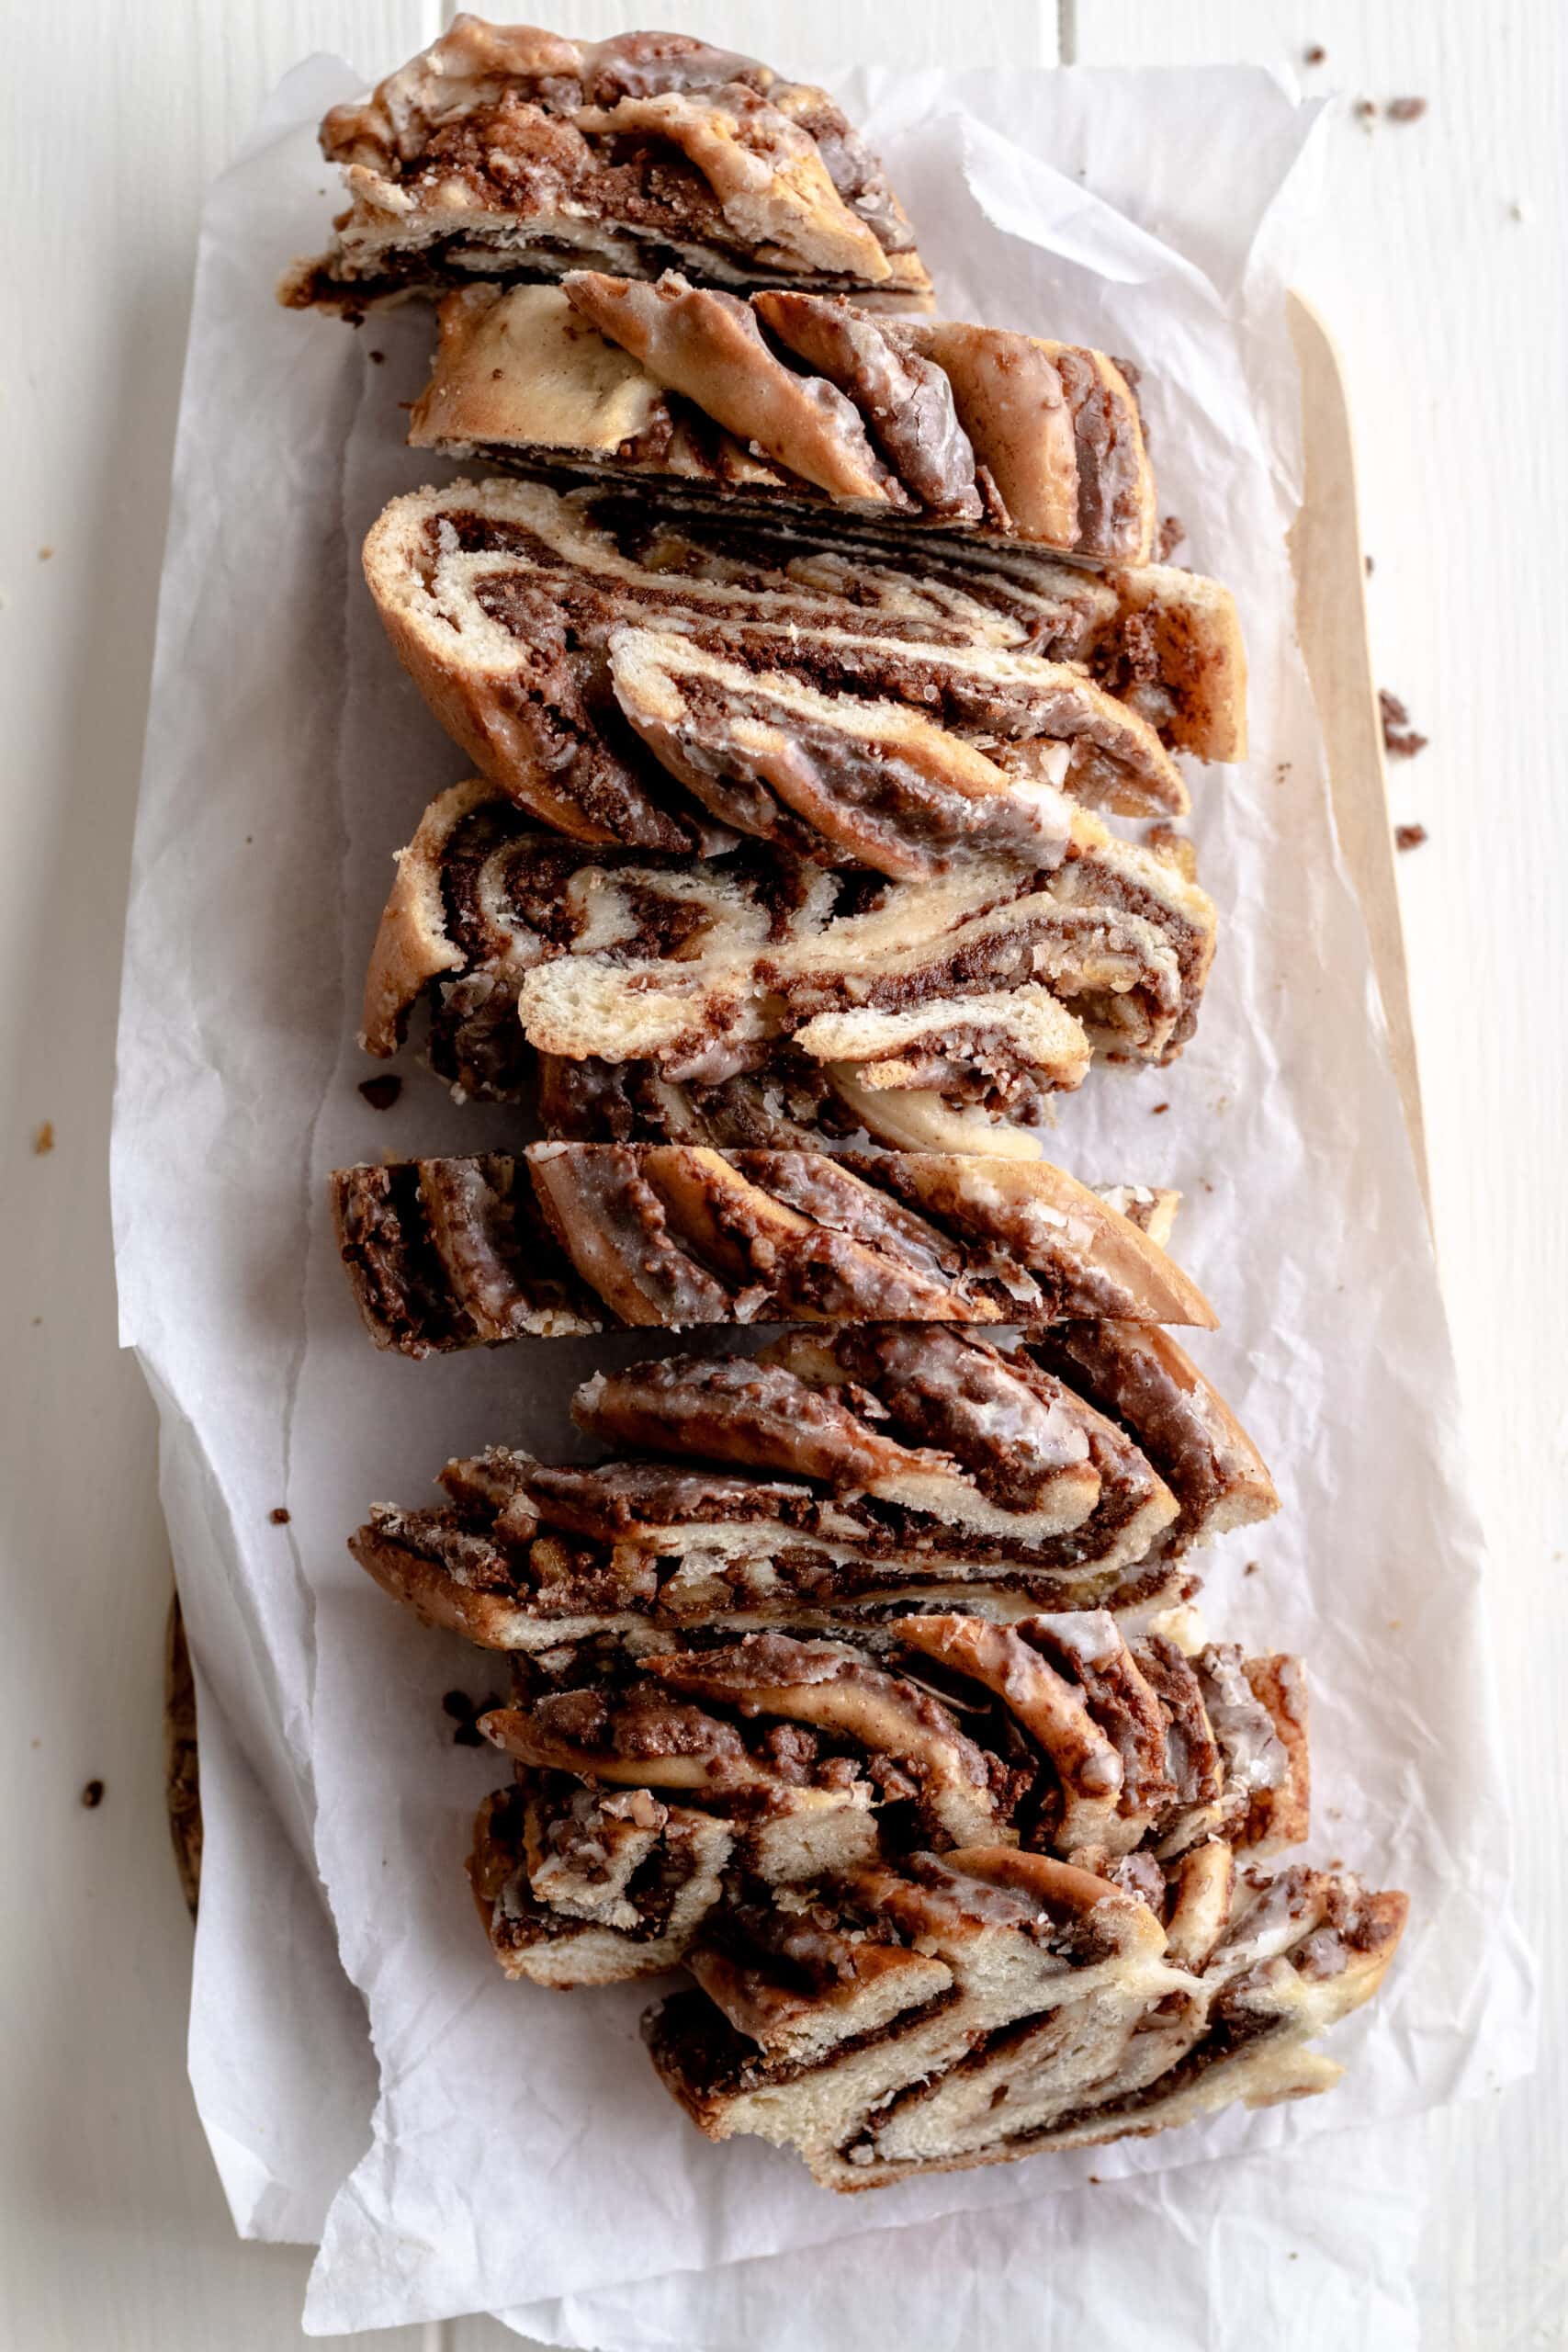 Image of chocolate nut swirl bread cut into slices on top of parchment paper.